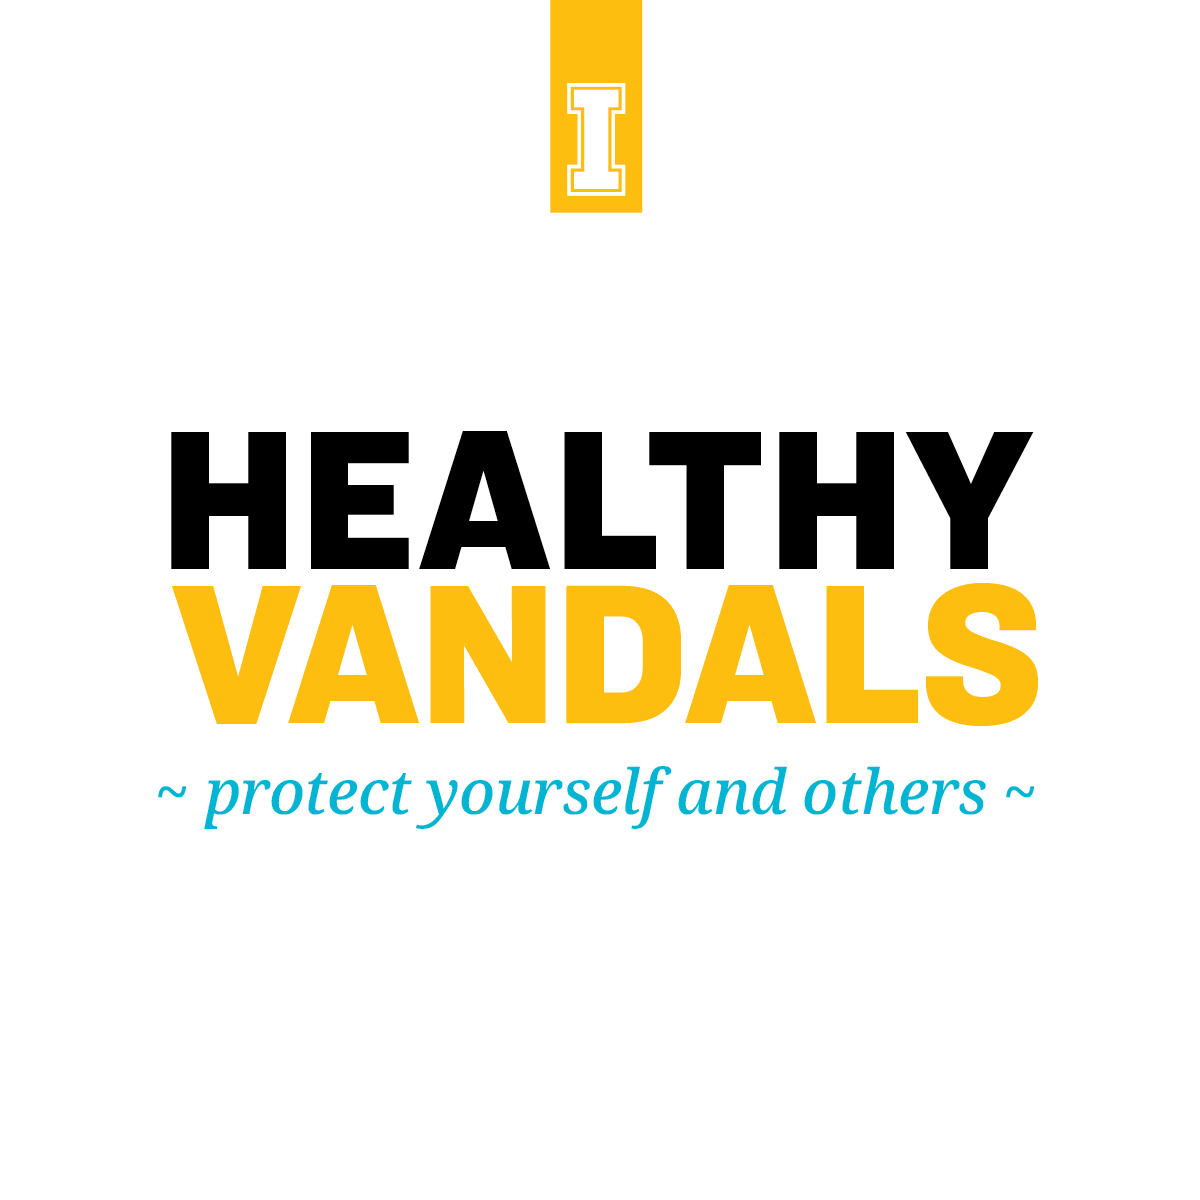 Healthy Vandals protect yourself and others: maintaining social distance, cover moutn and nose with a cloth face covering, keep hands clean, cover coughs and sneezes with elbow, clean and disinfect